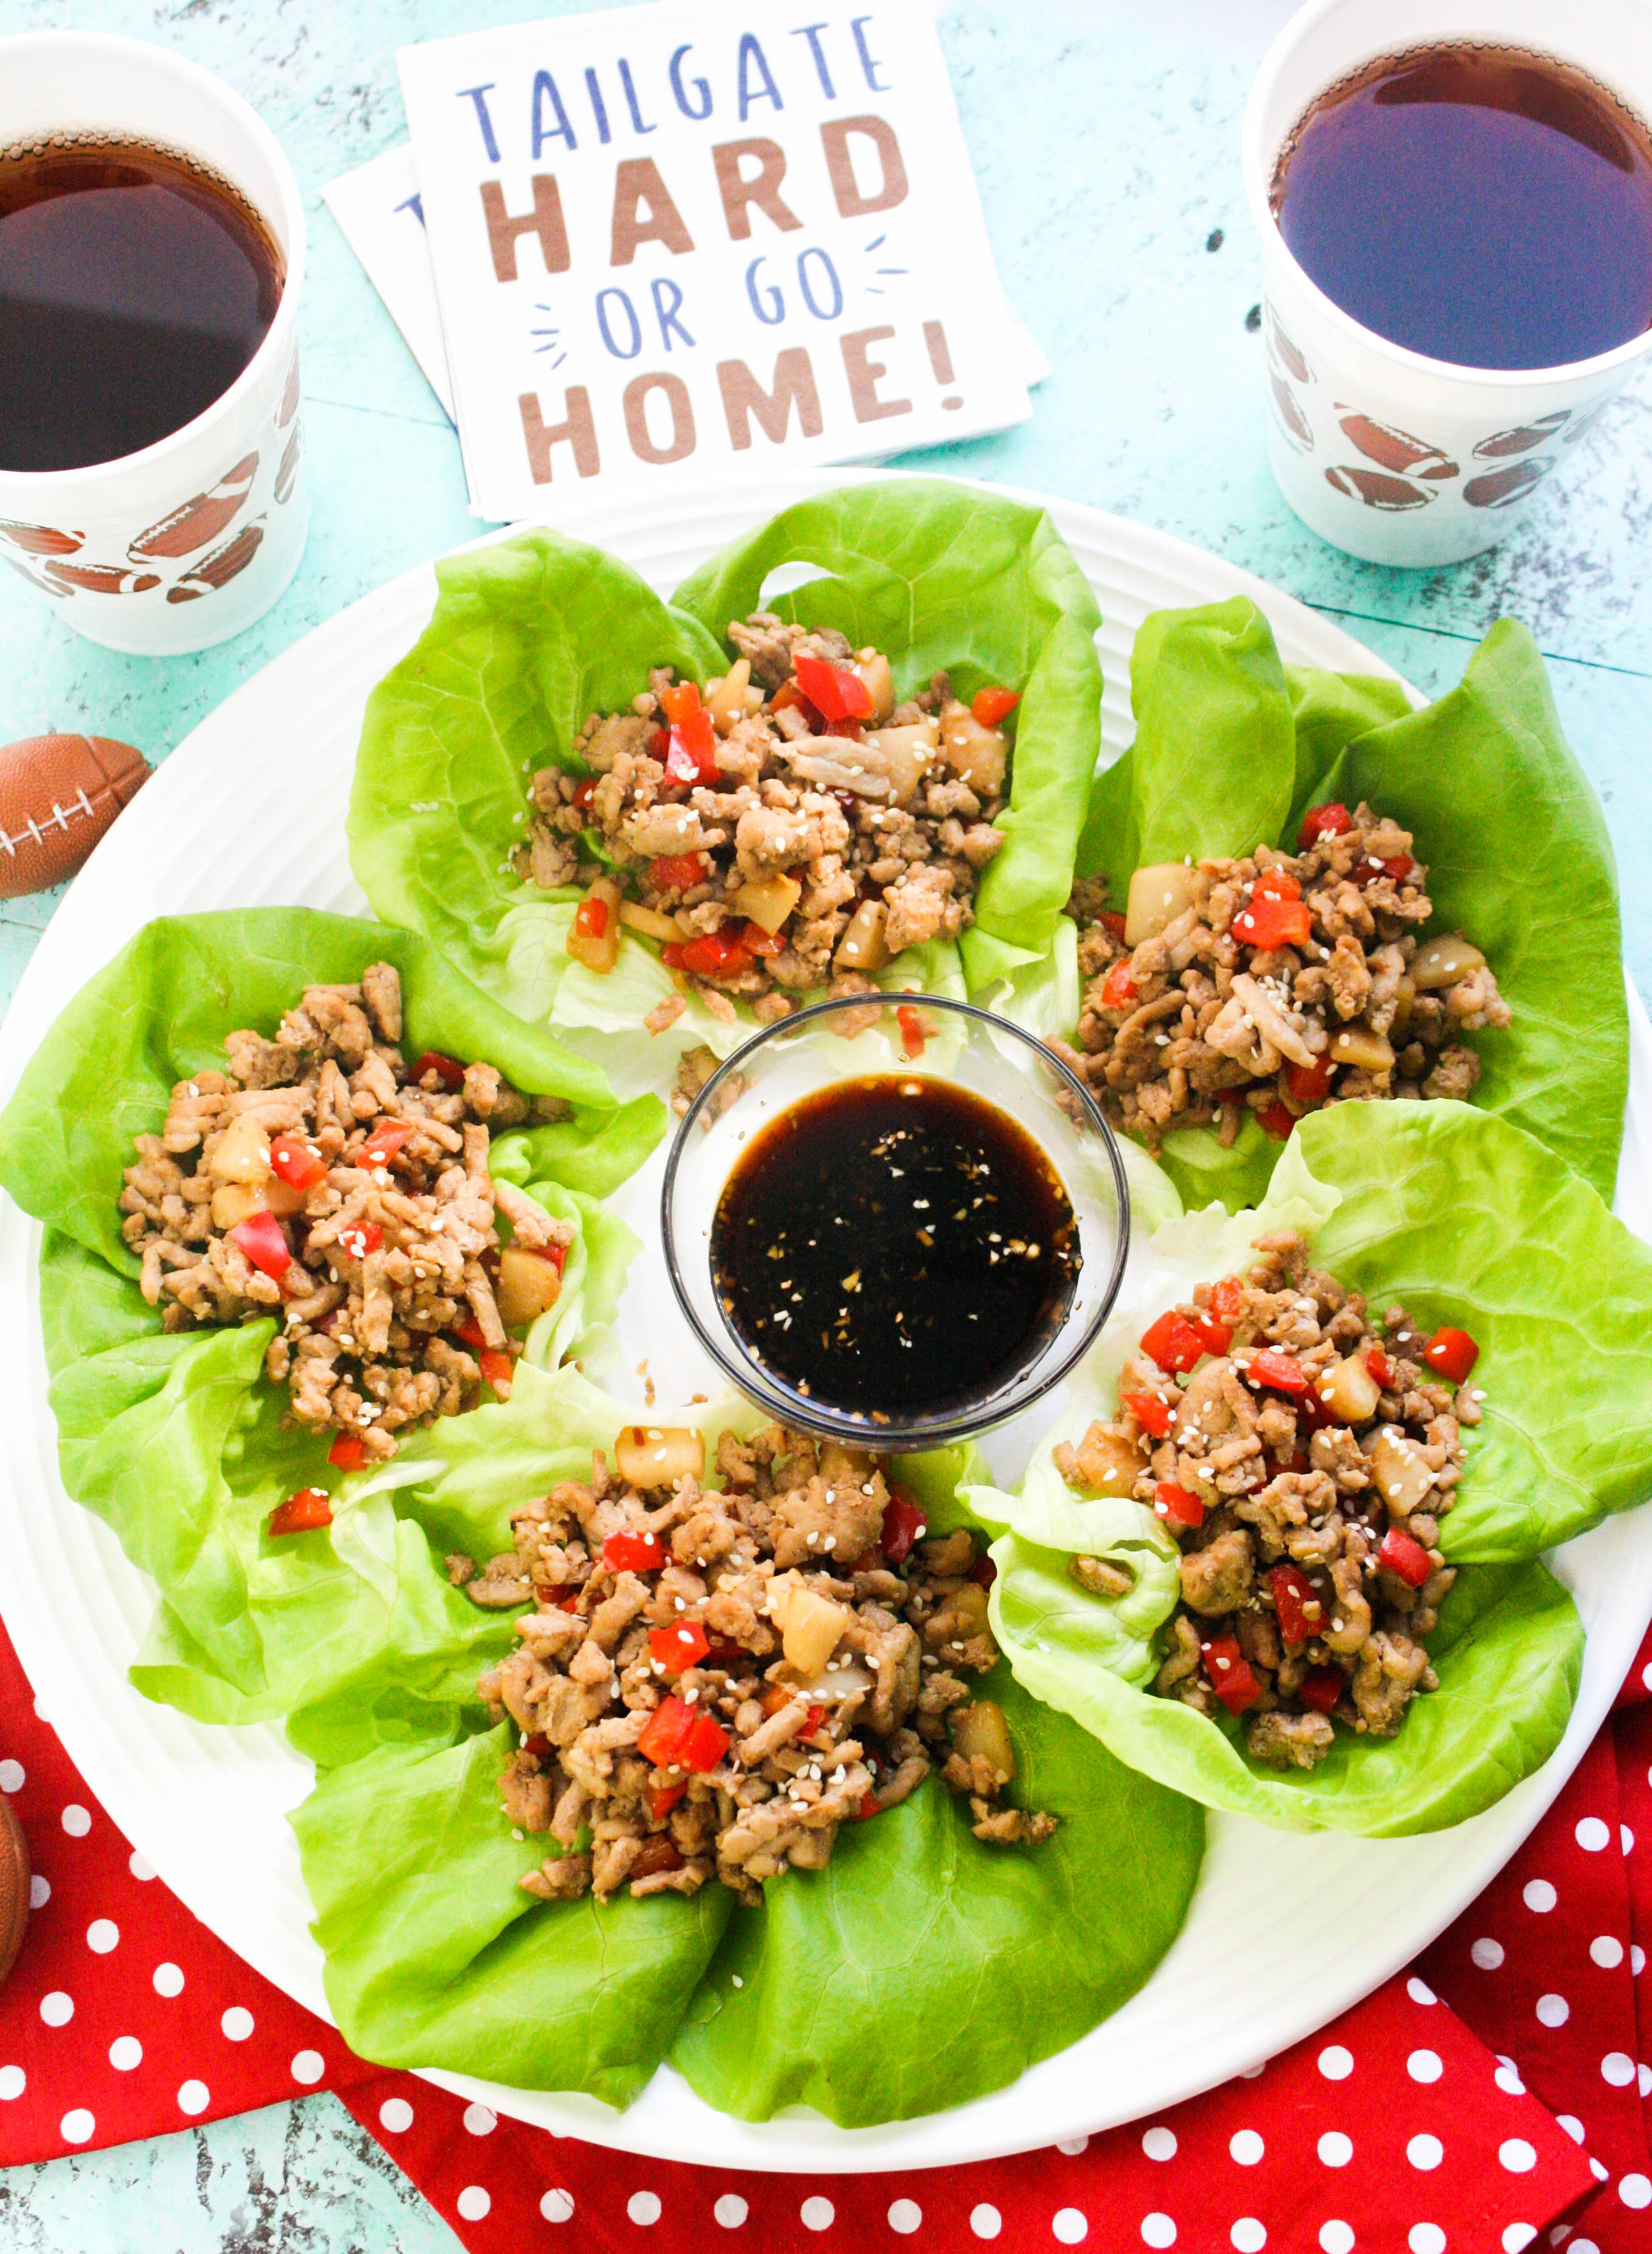 Touchdown Turkey Lettuce Wraps are perfect for game-day snacking! You'll love adding Touchdown Turkey Lettuce Wraps to your game-day menu!